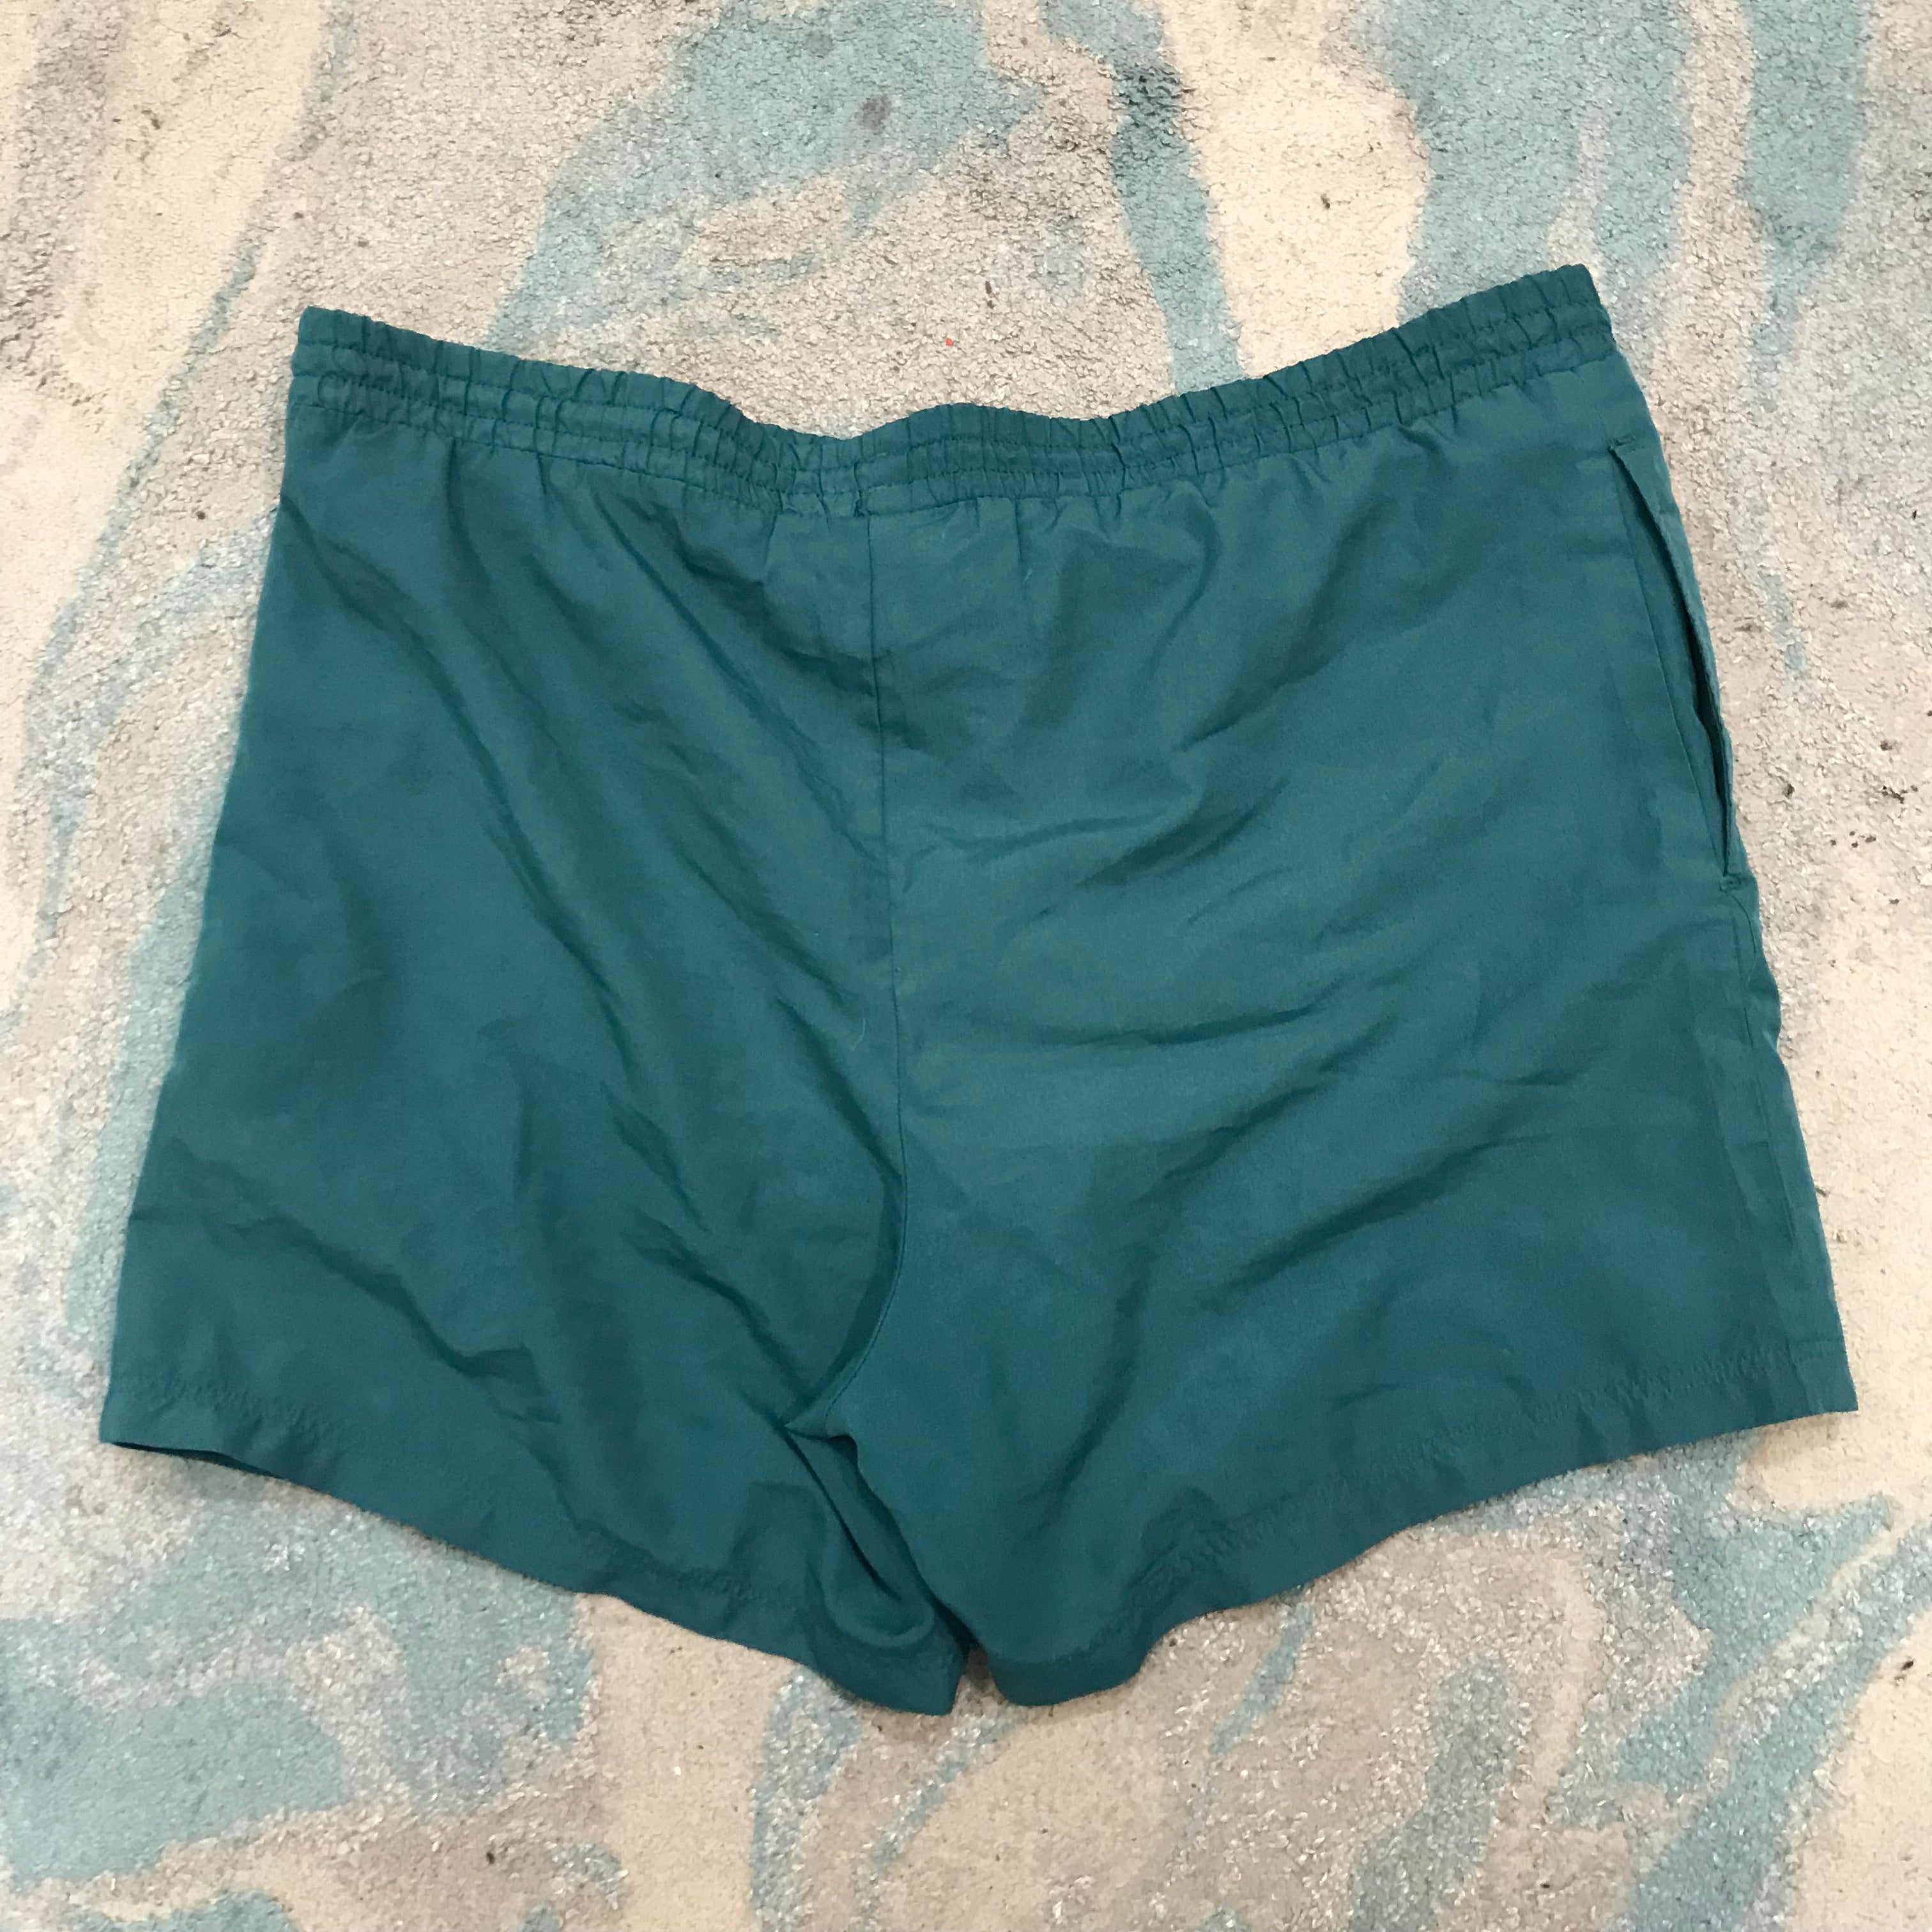 Primary Vintage | Shorts & Trousers – Leech Vintage